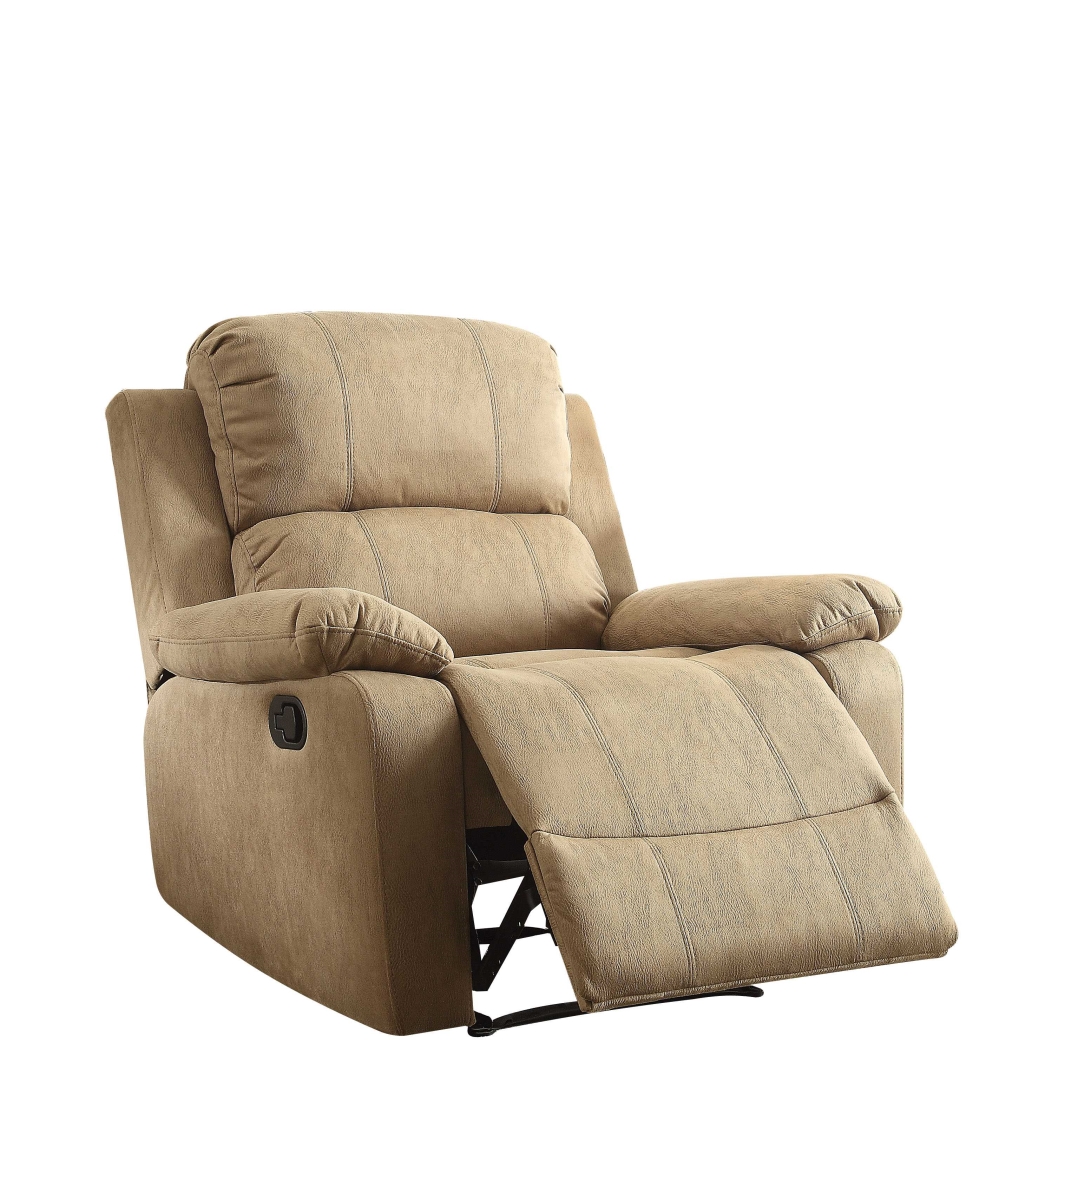 Home Roots Furniture 286178 39 X 38 X 38 In. Polished Microfiber Fabric Recliner - Brown